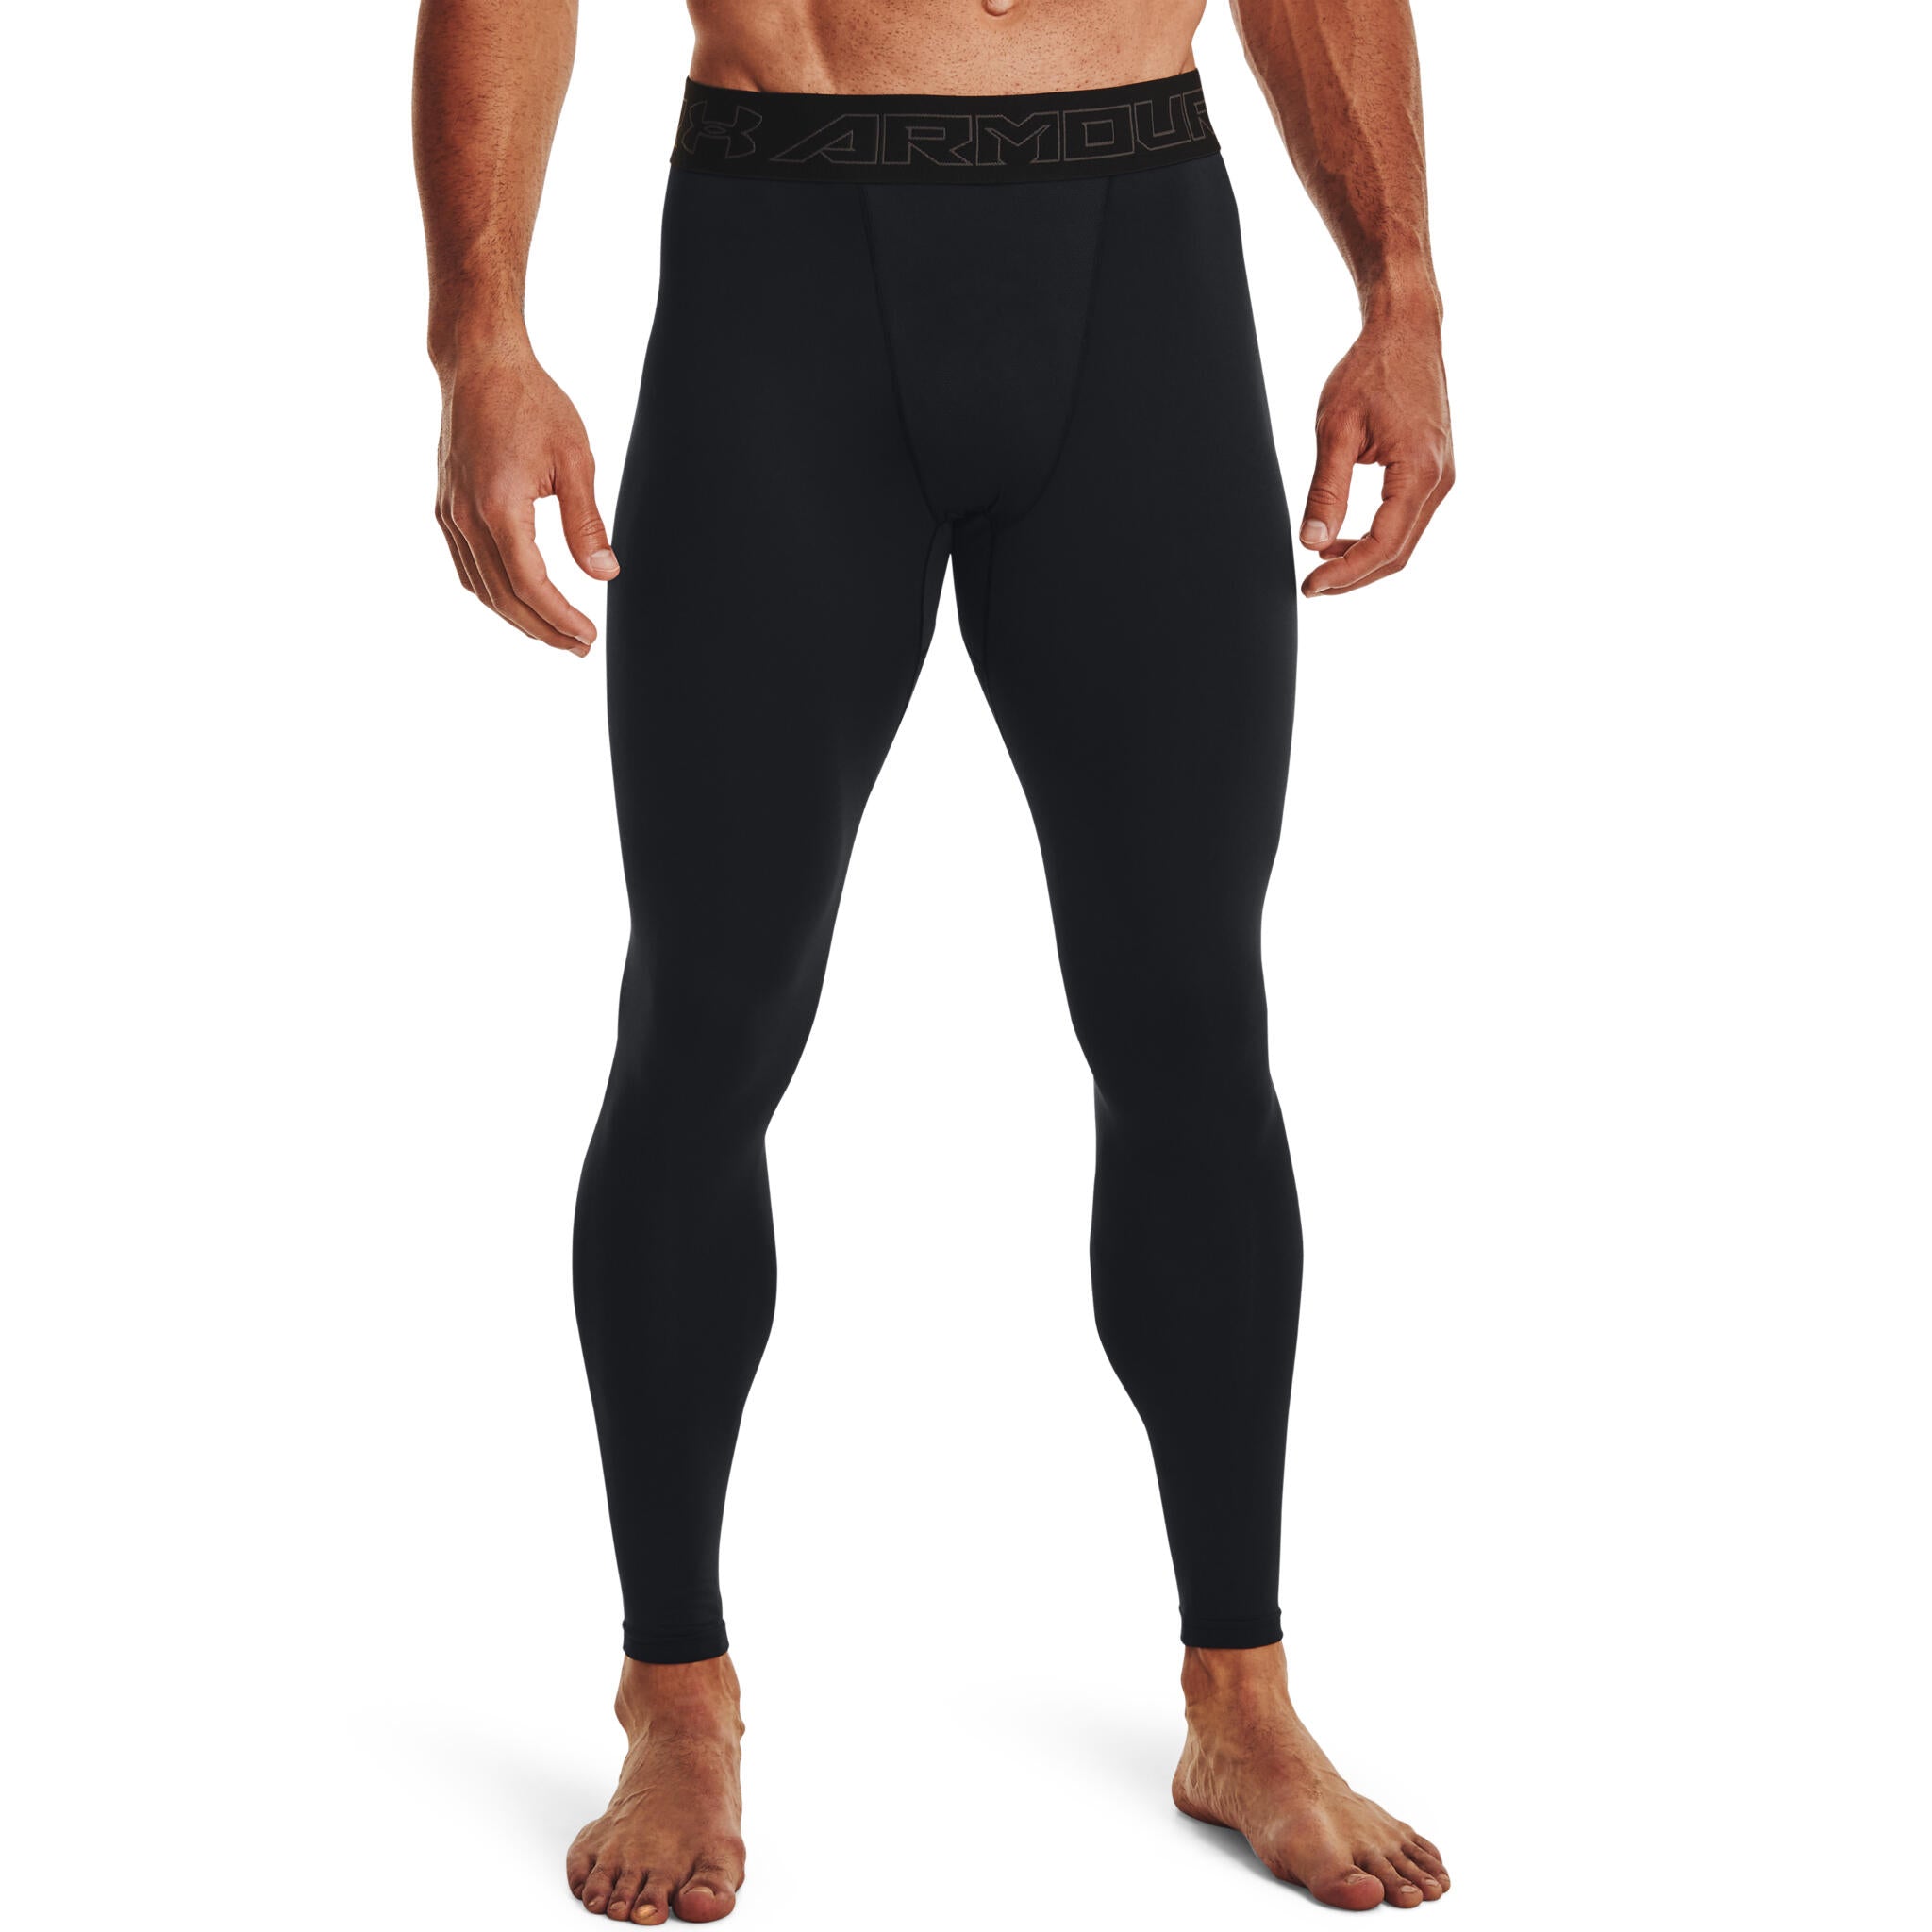 Under Armour ColdGear Compression Legging Charcoal Heather 1320812-019 -  Free Shipping at LASC